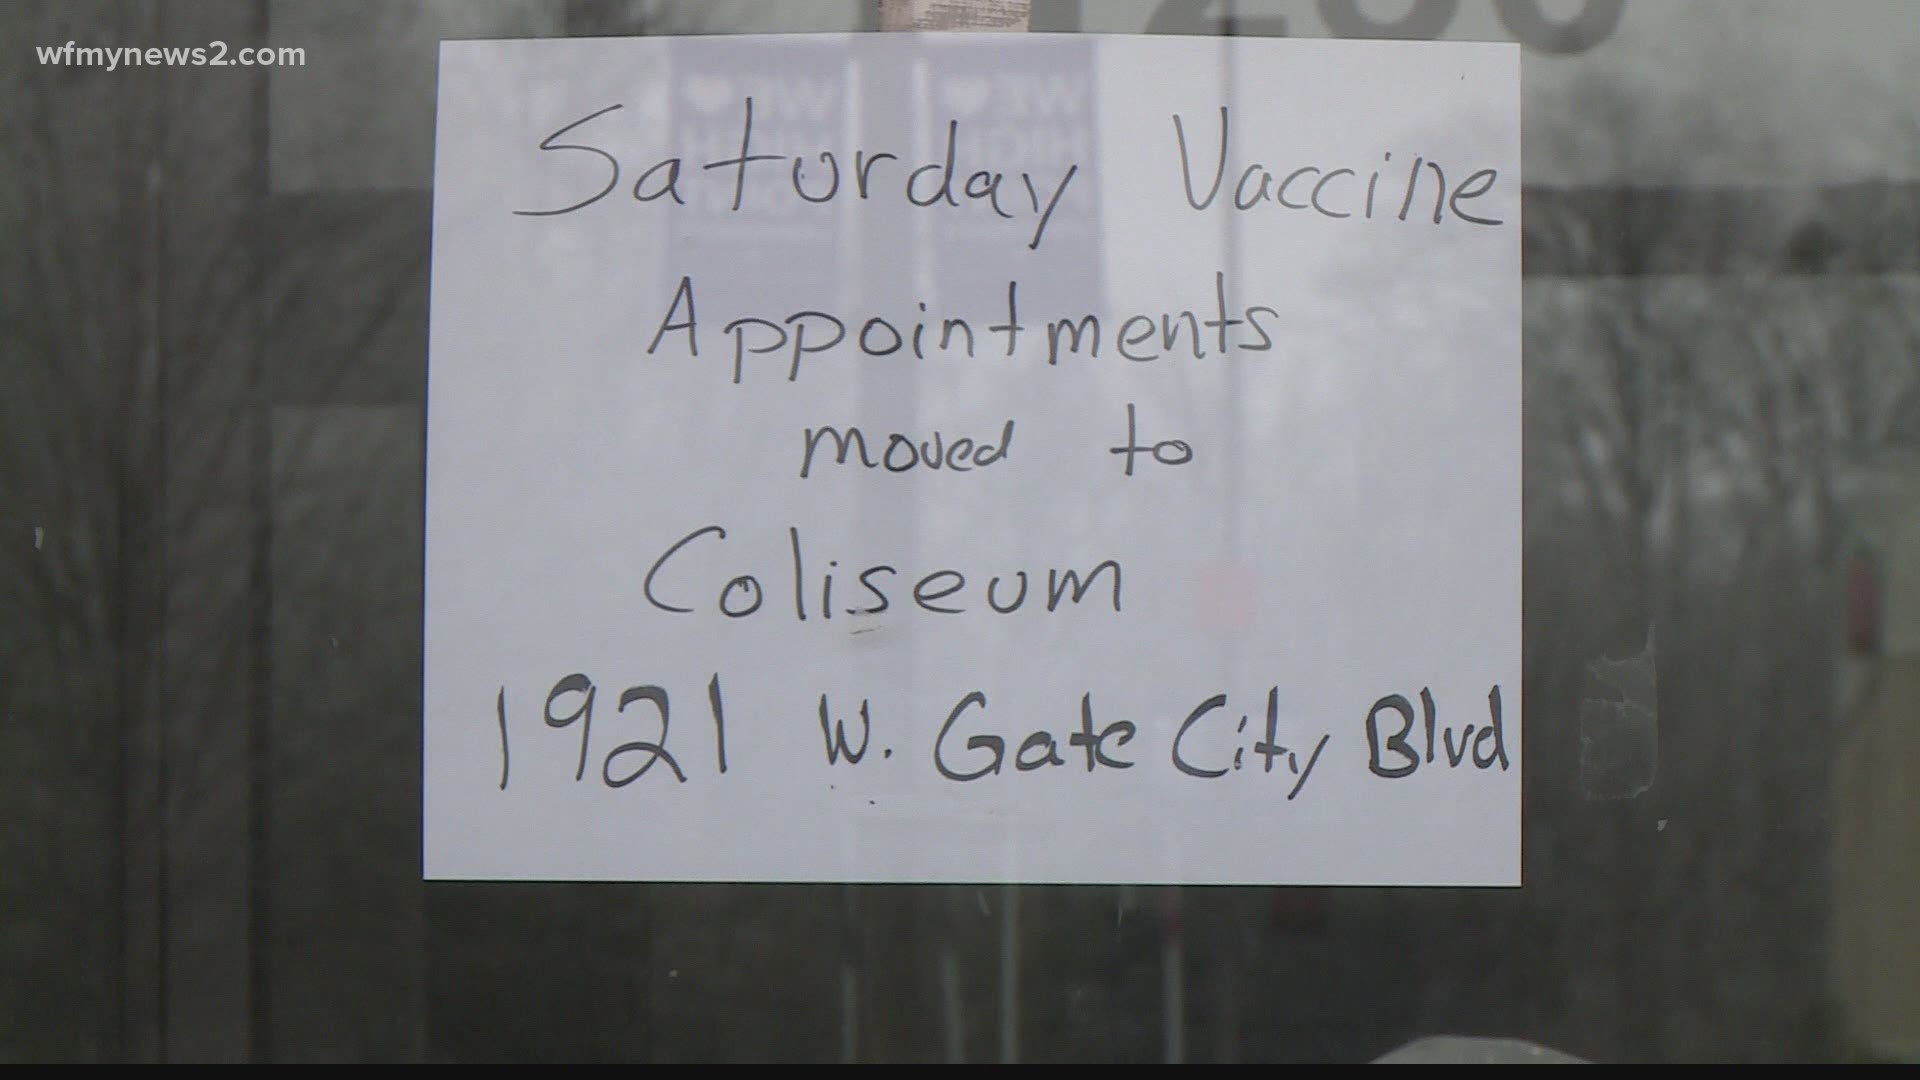 The Guilford County Health Department says 550 people were scheduled to get their vaccine at the High Point clinic today.